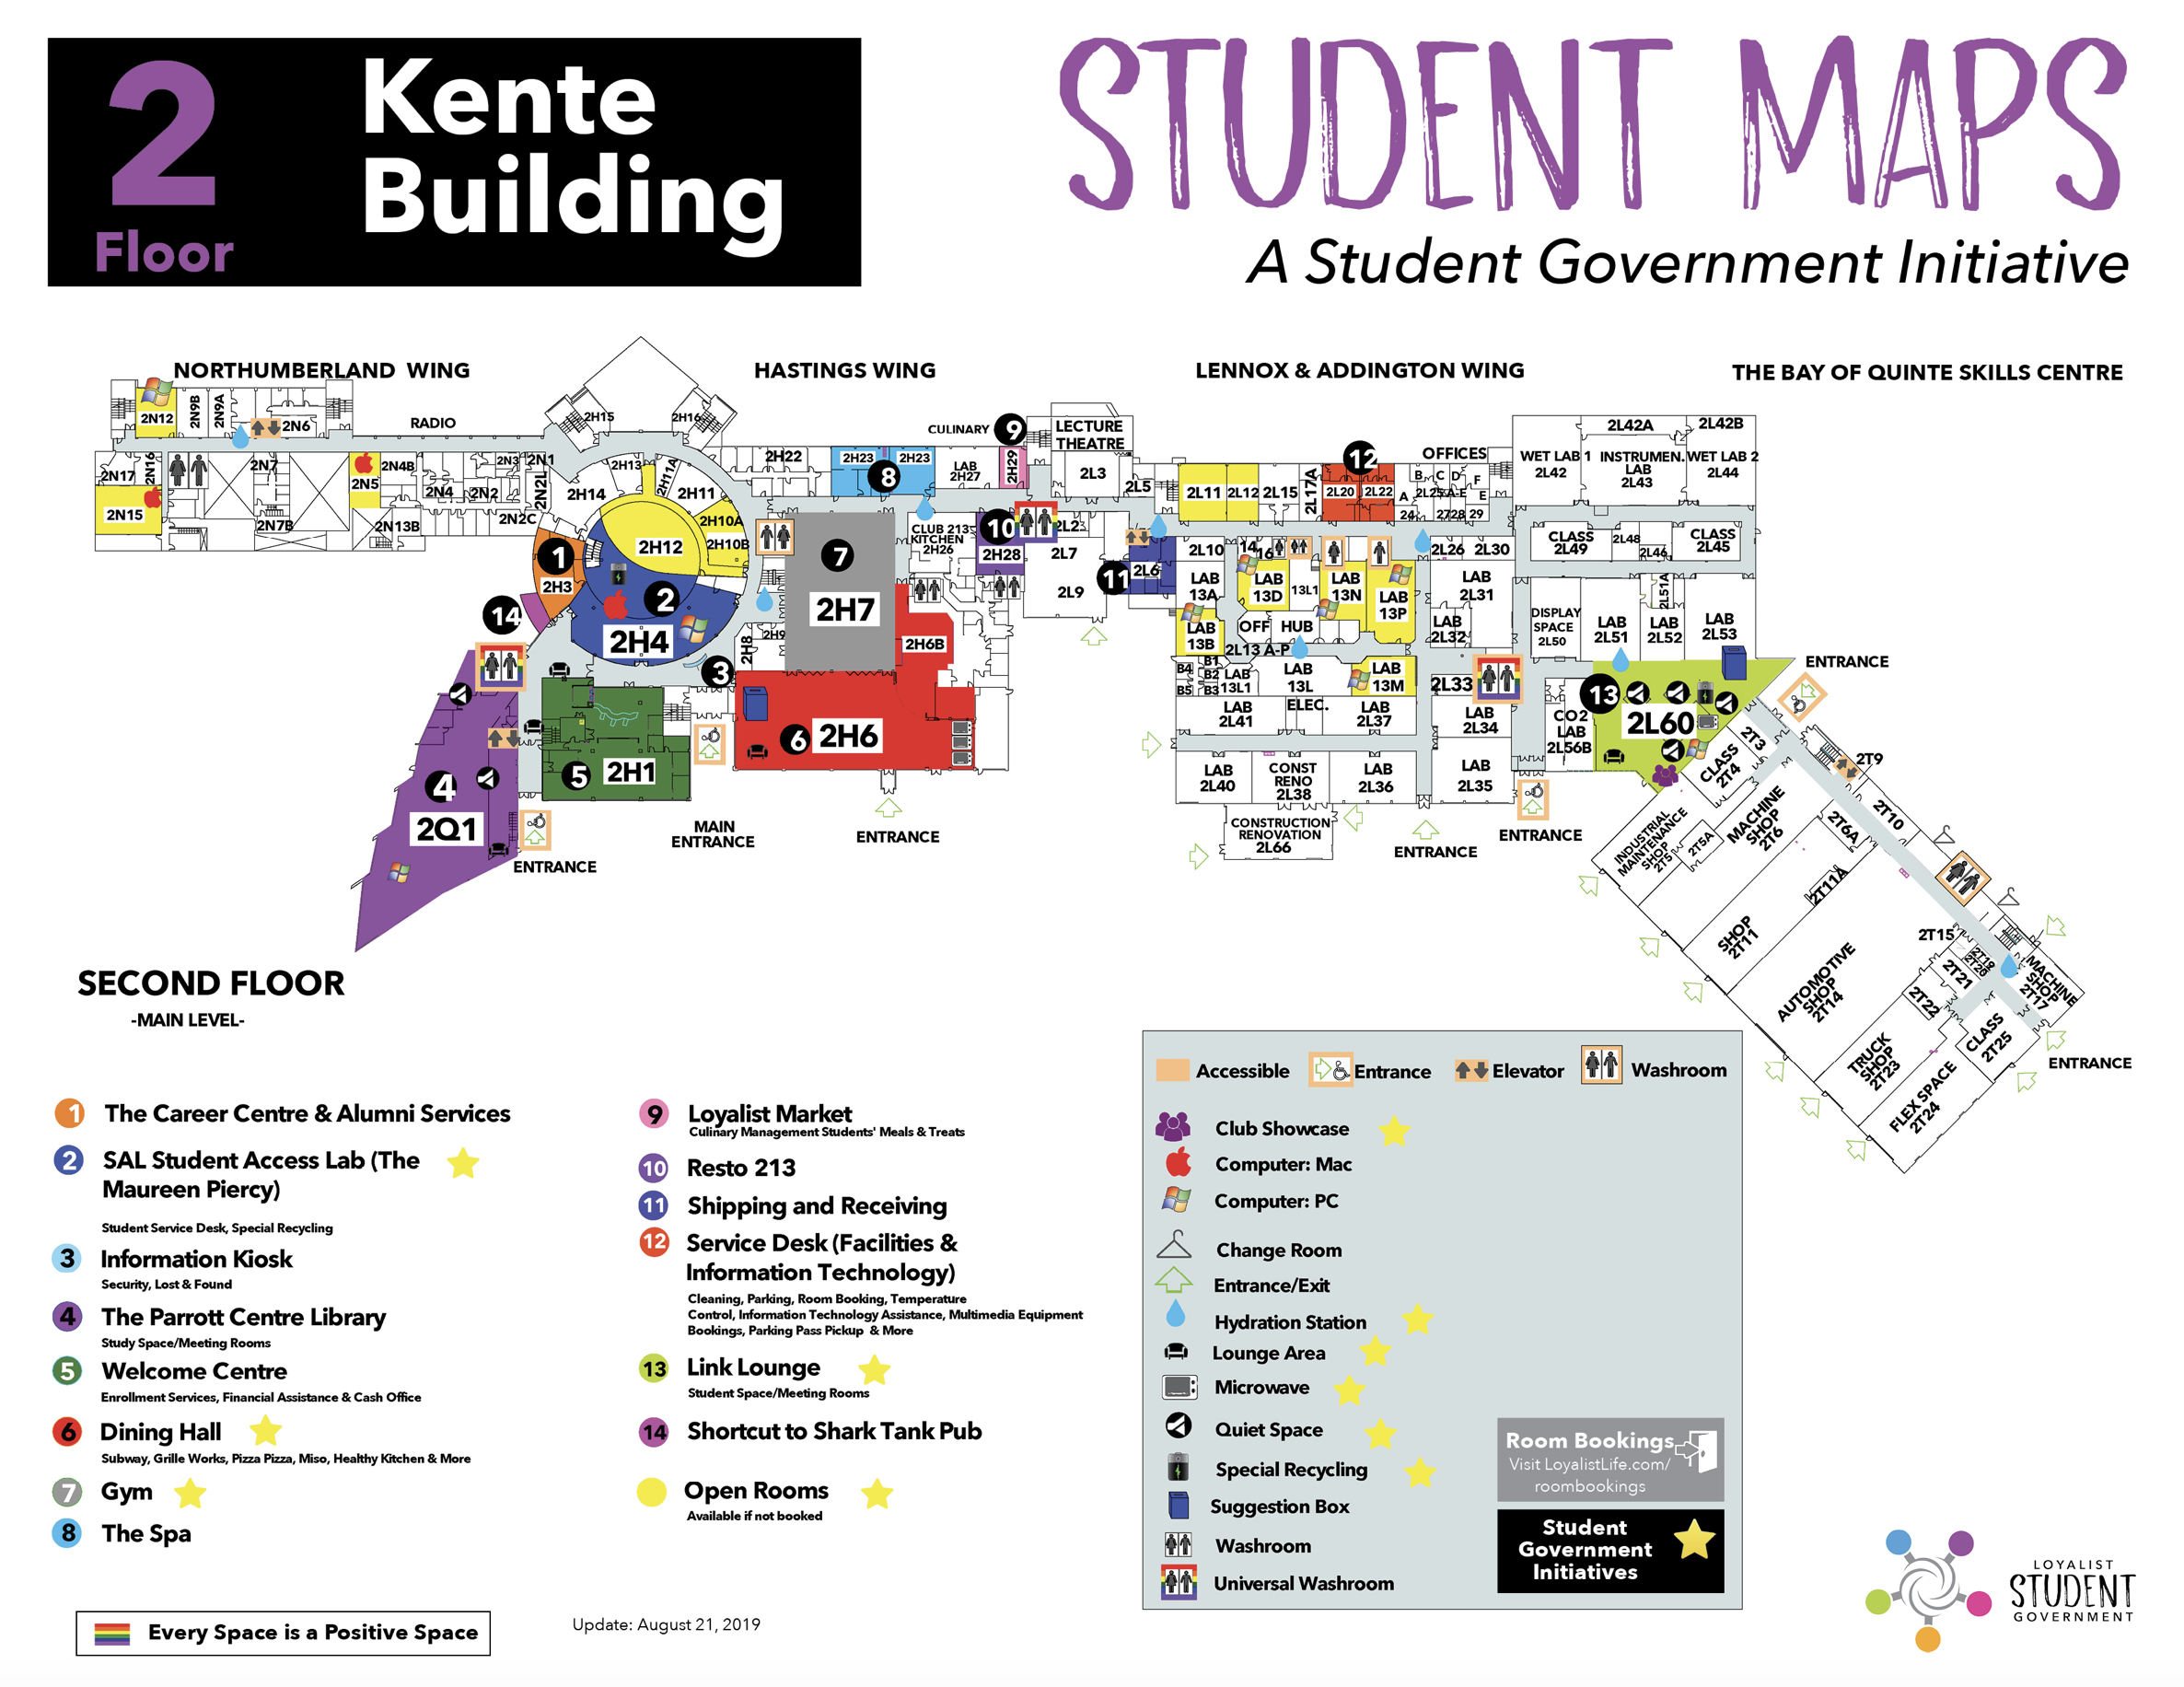 Map of Kente Building at Loyalist College - Level 2 indicating location of Resto 213 and the Loyalist Market.